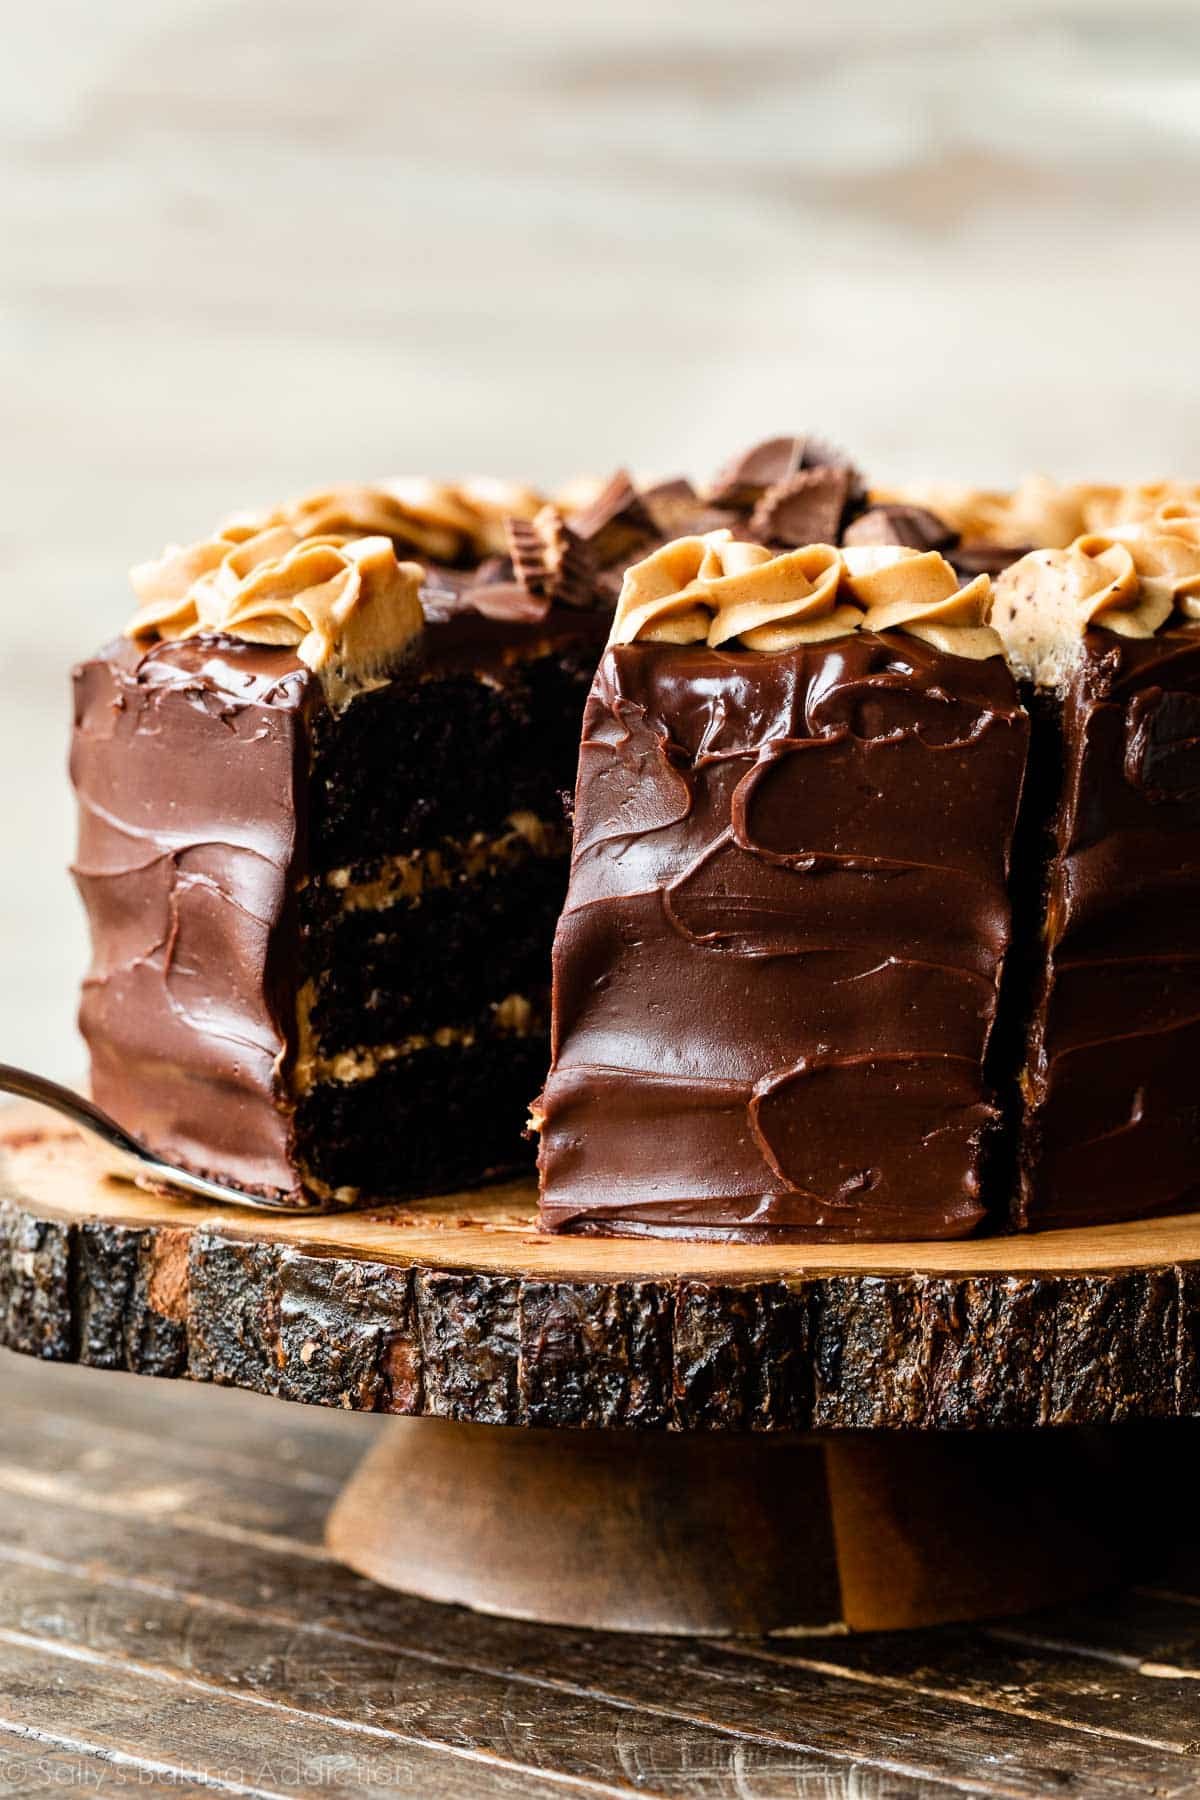 chocolate peanut butter cake frosted with chocolate ganache on wood cake stand.